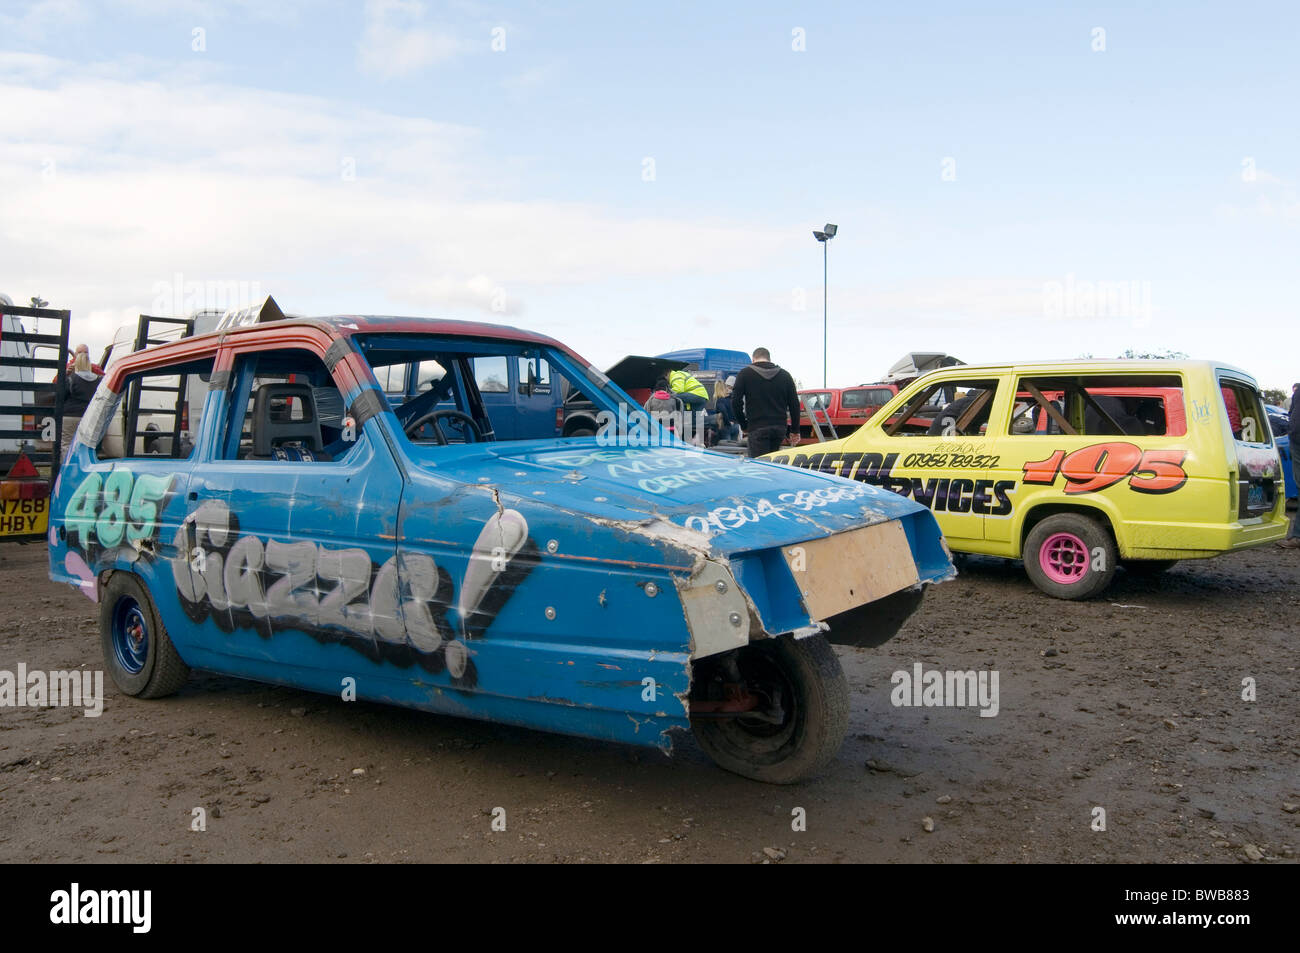 reliant robin three wheelers ready for a banger race Stock Photo